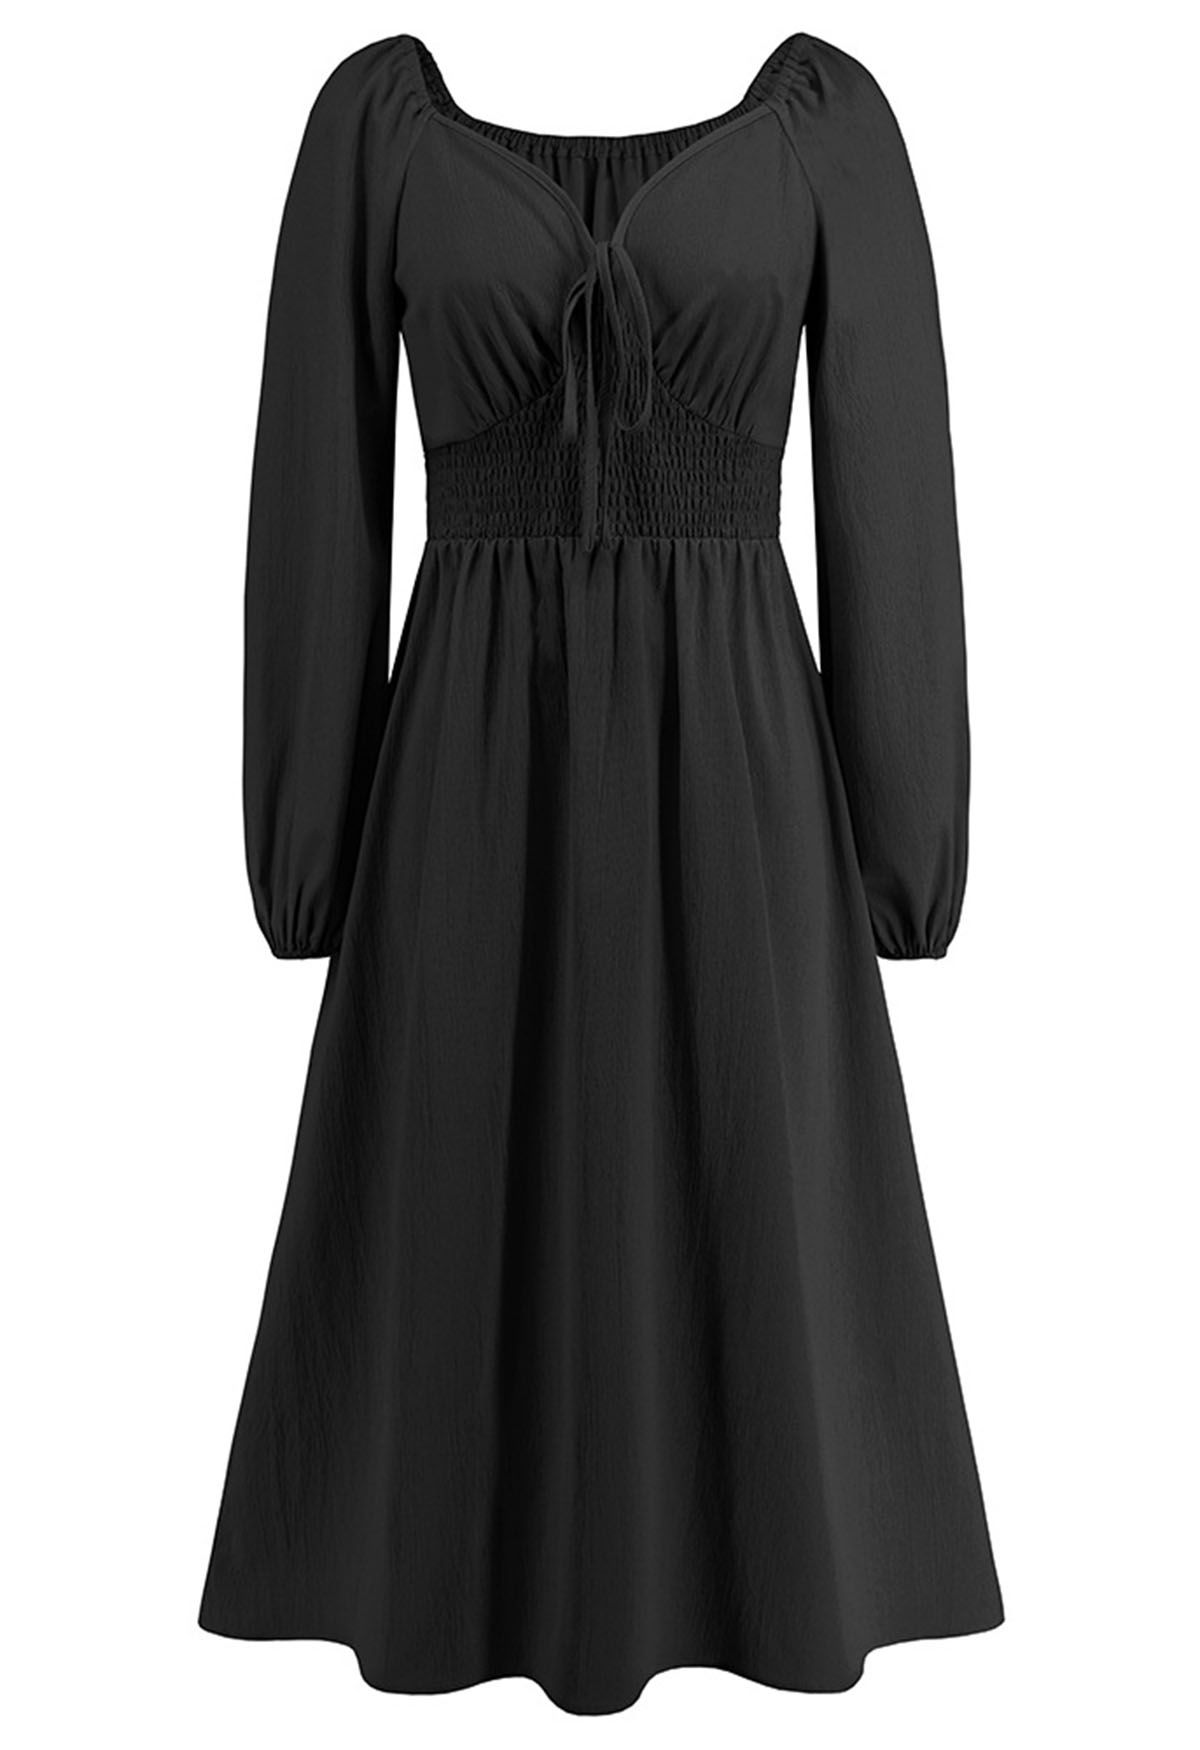 Sweetheart Neck Tie Front Midi Dress in Black - Retro, Indie and Unique ...